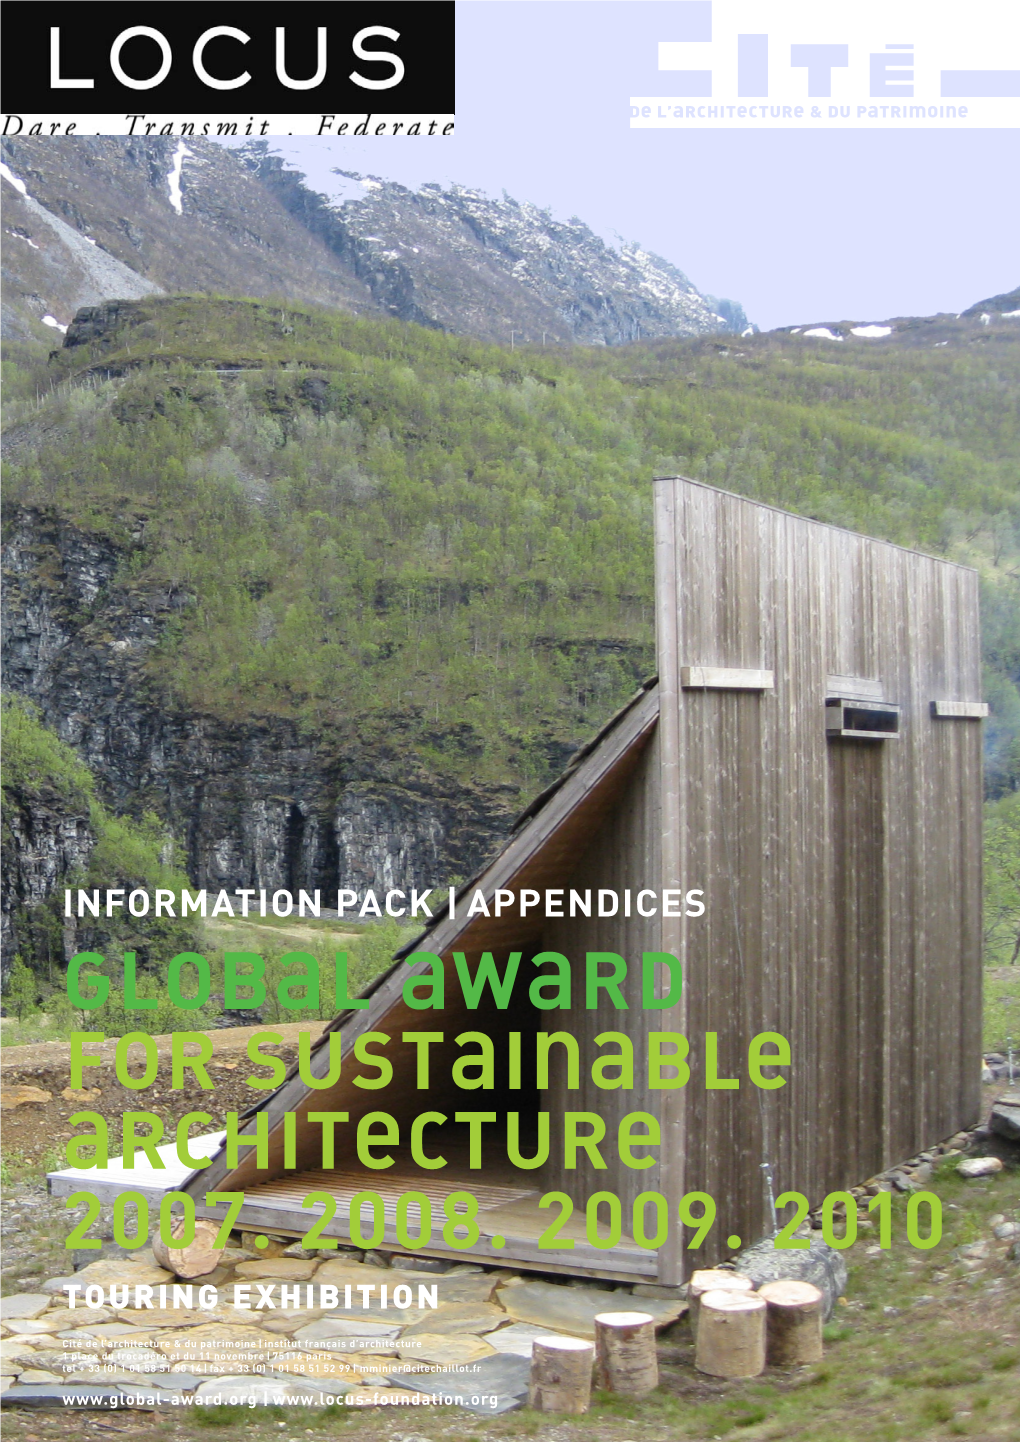 Global Award for Sustainable Architecture 2007. 2008. 2009. 2010 Touring Exhibition